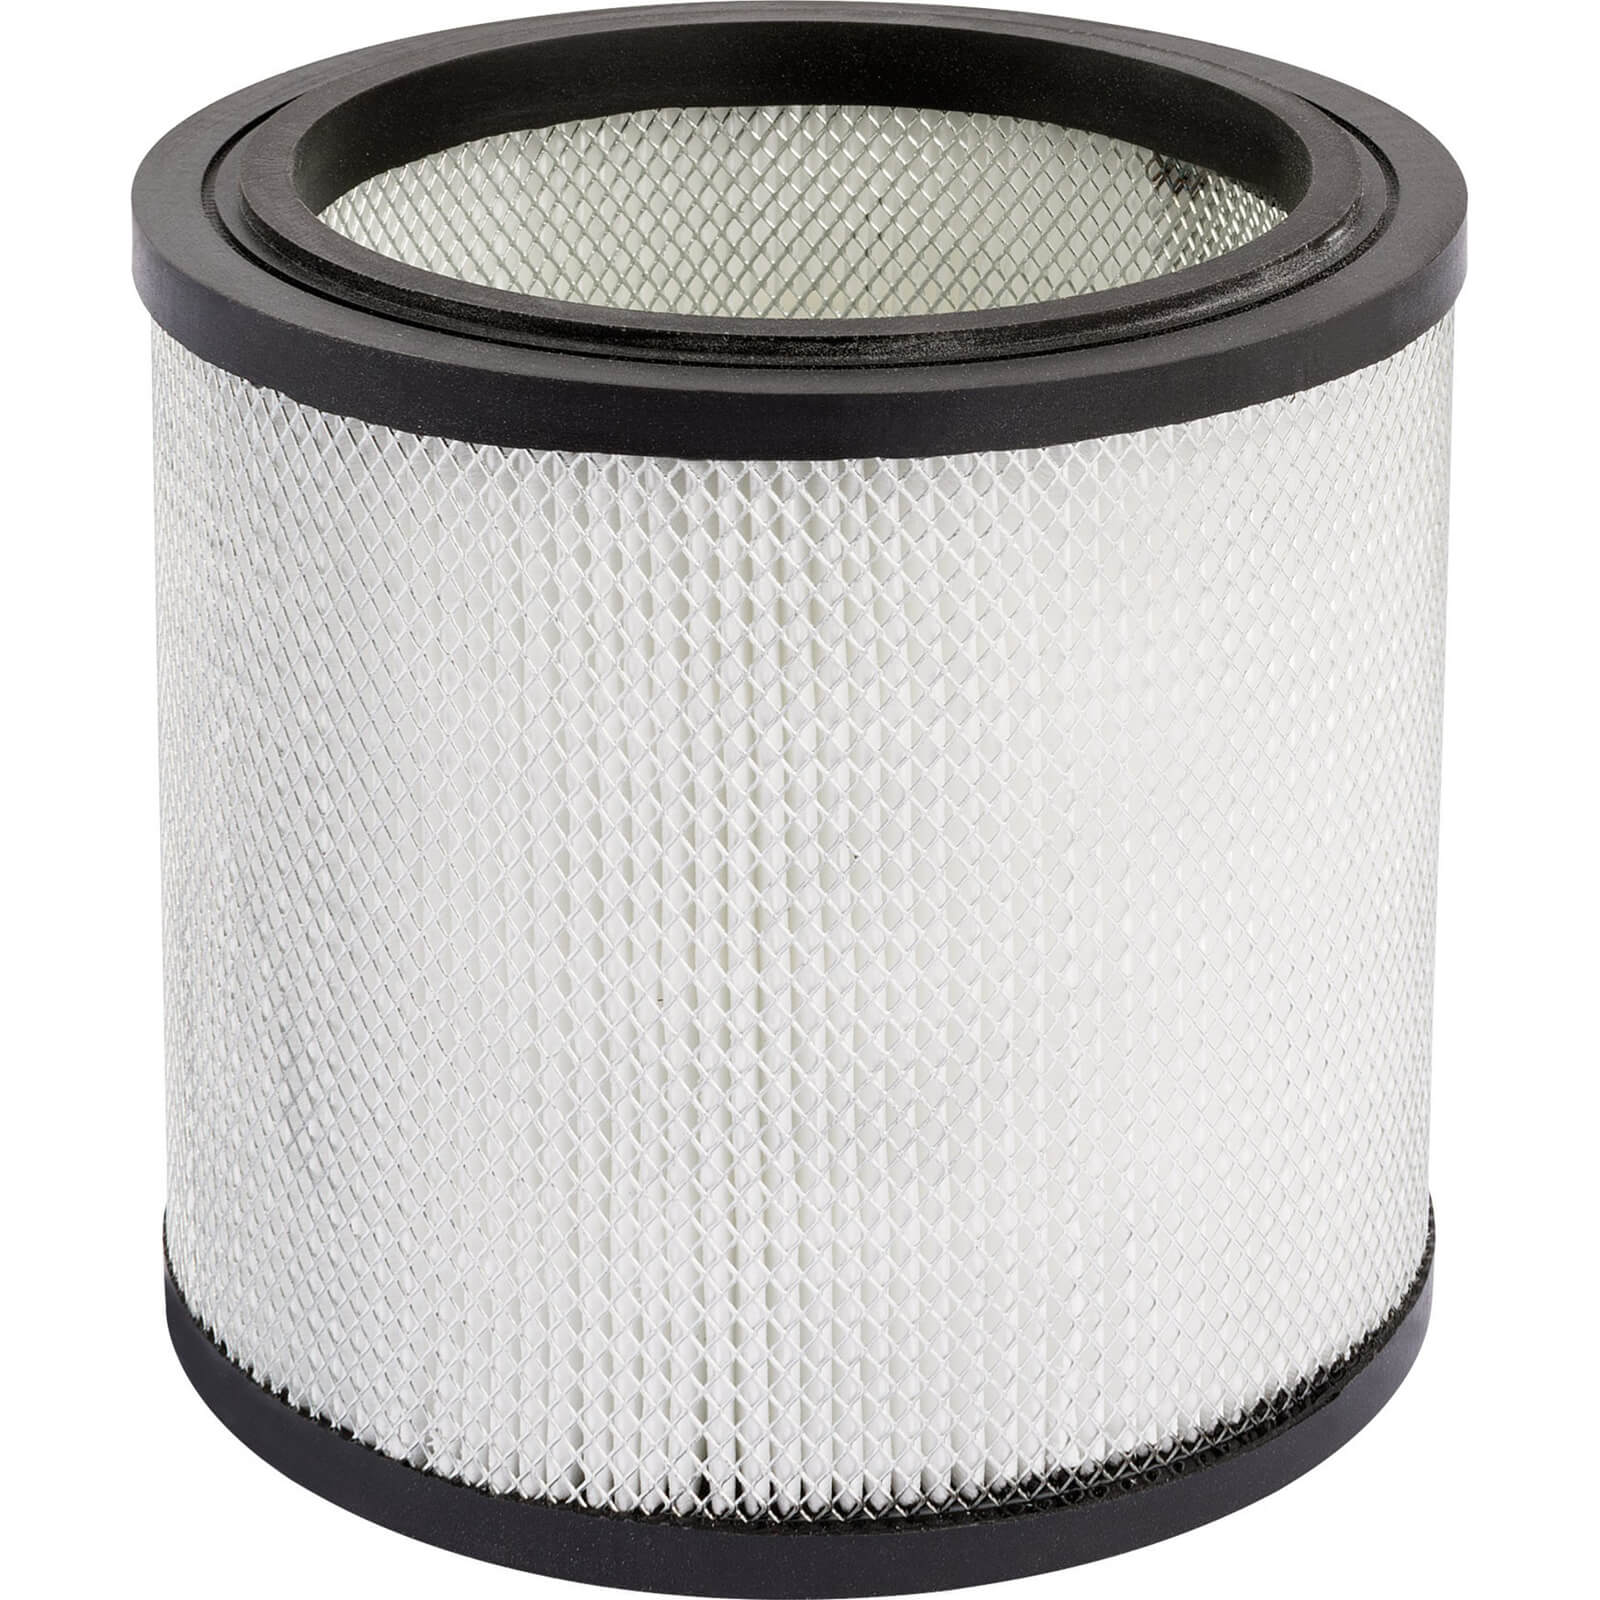 Image of Draper Cartridge Filter for Ash Can Vacuum Cleaners